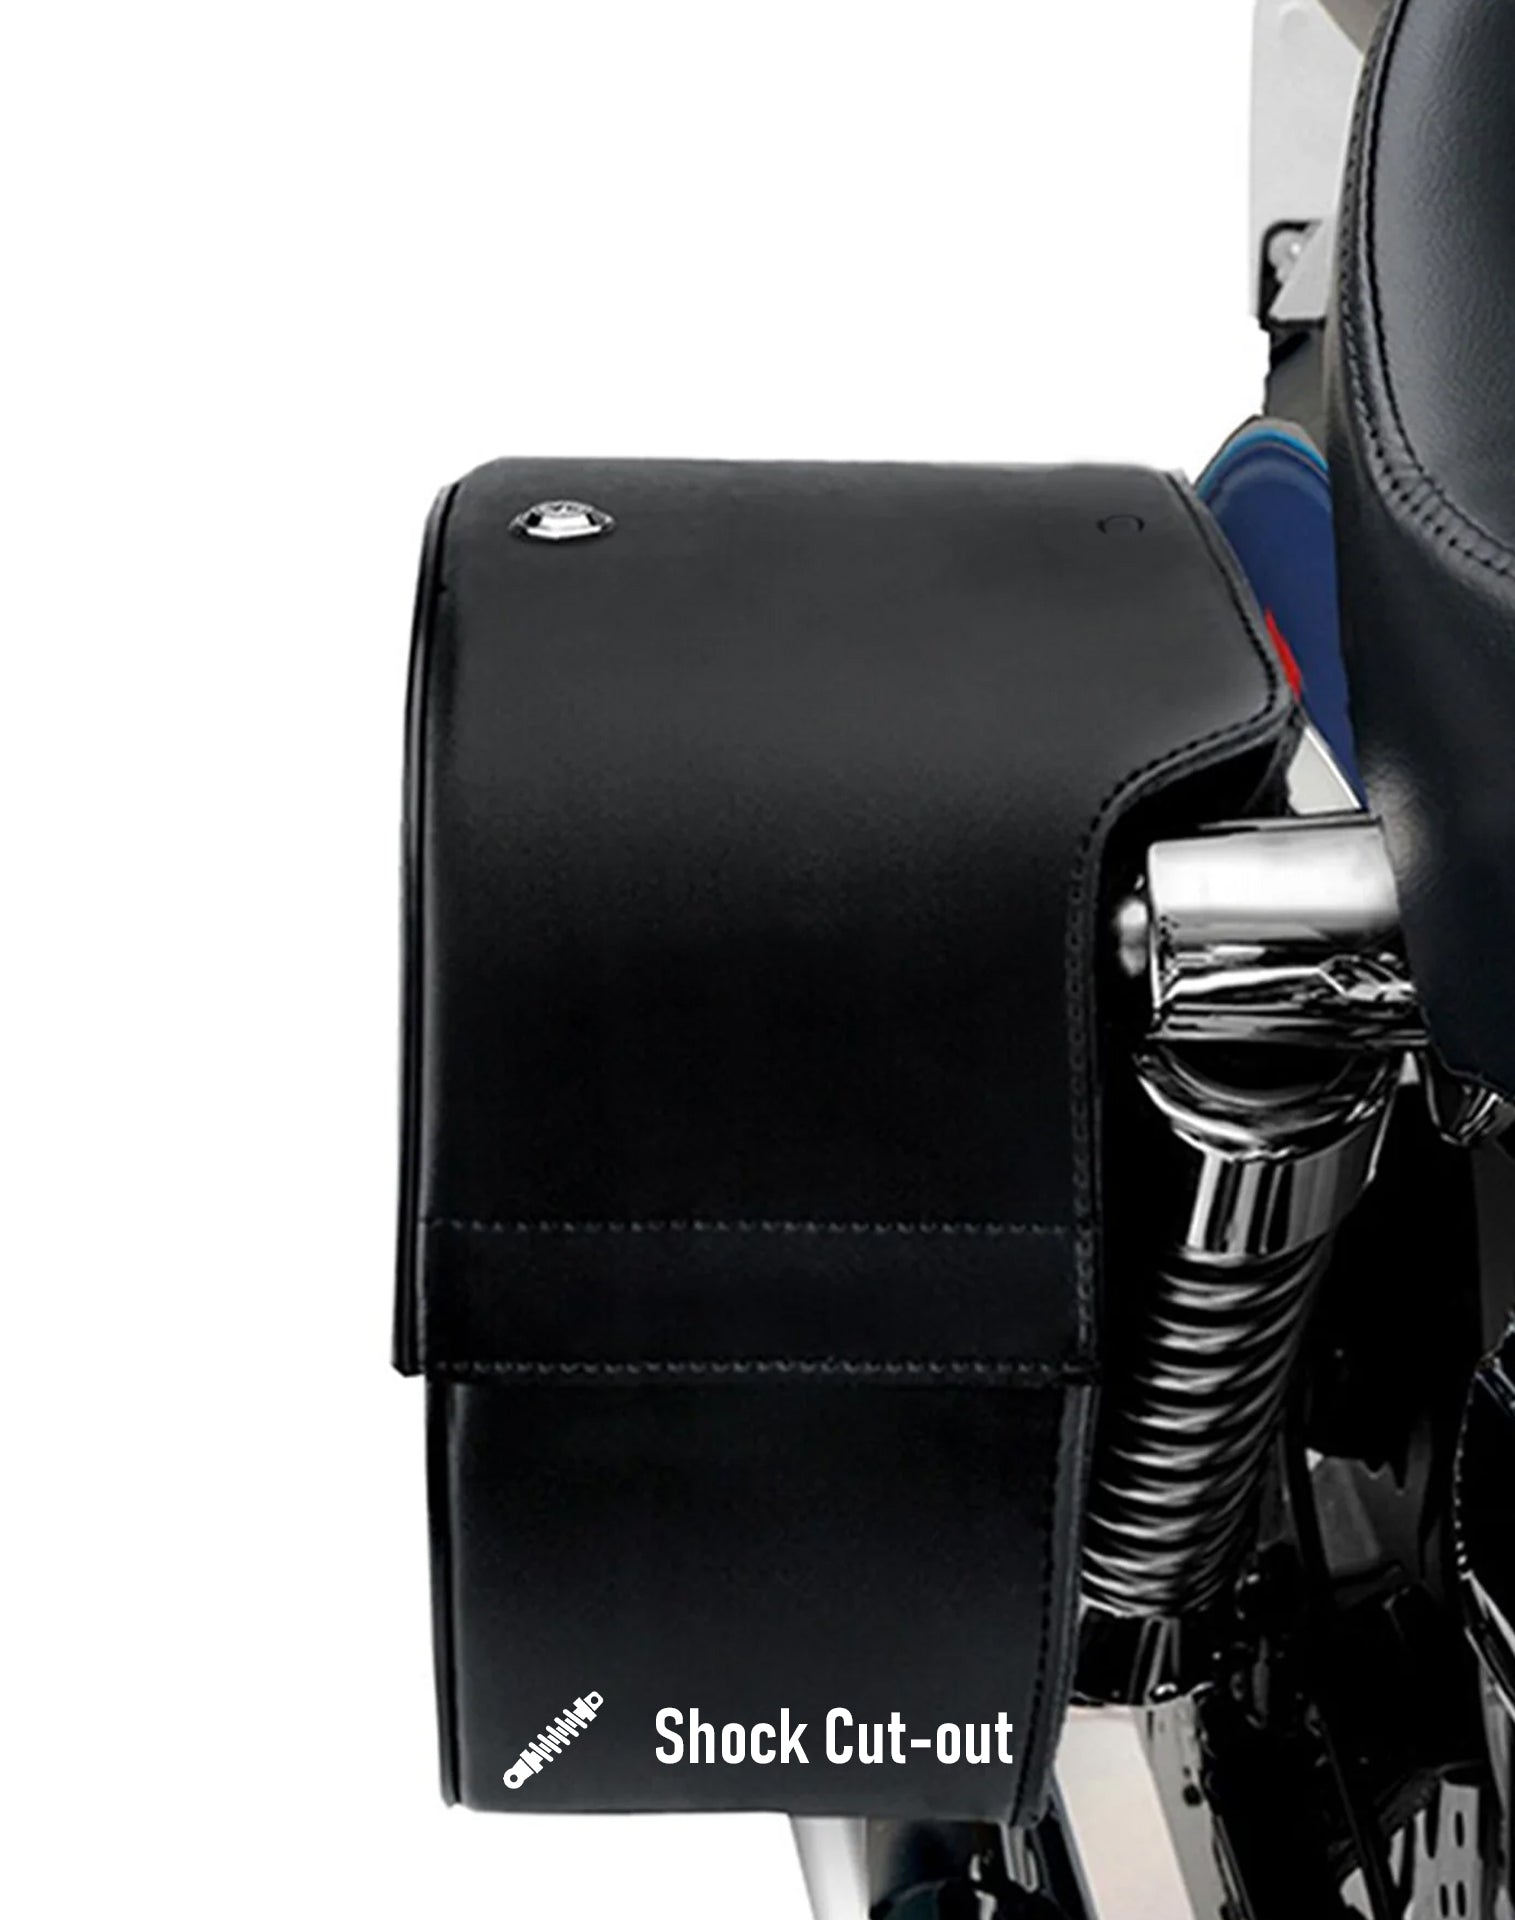 Viking Skarner Large Triumph Rocket Iii Classic Shock Cut Out Leather Motorcycle Saddlebags Hard Shell Construction